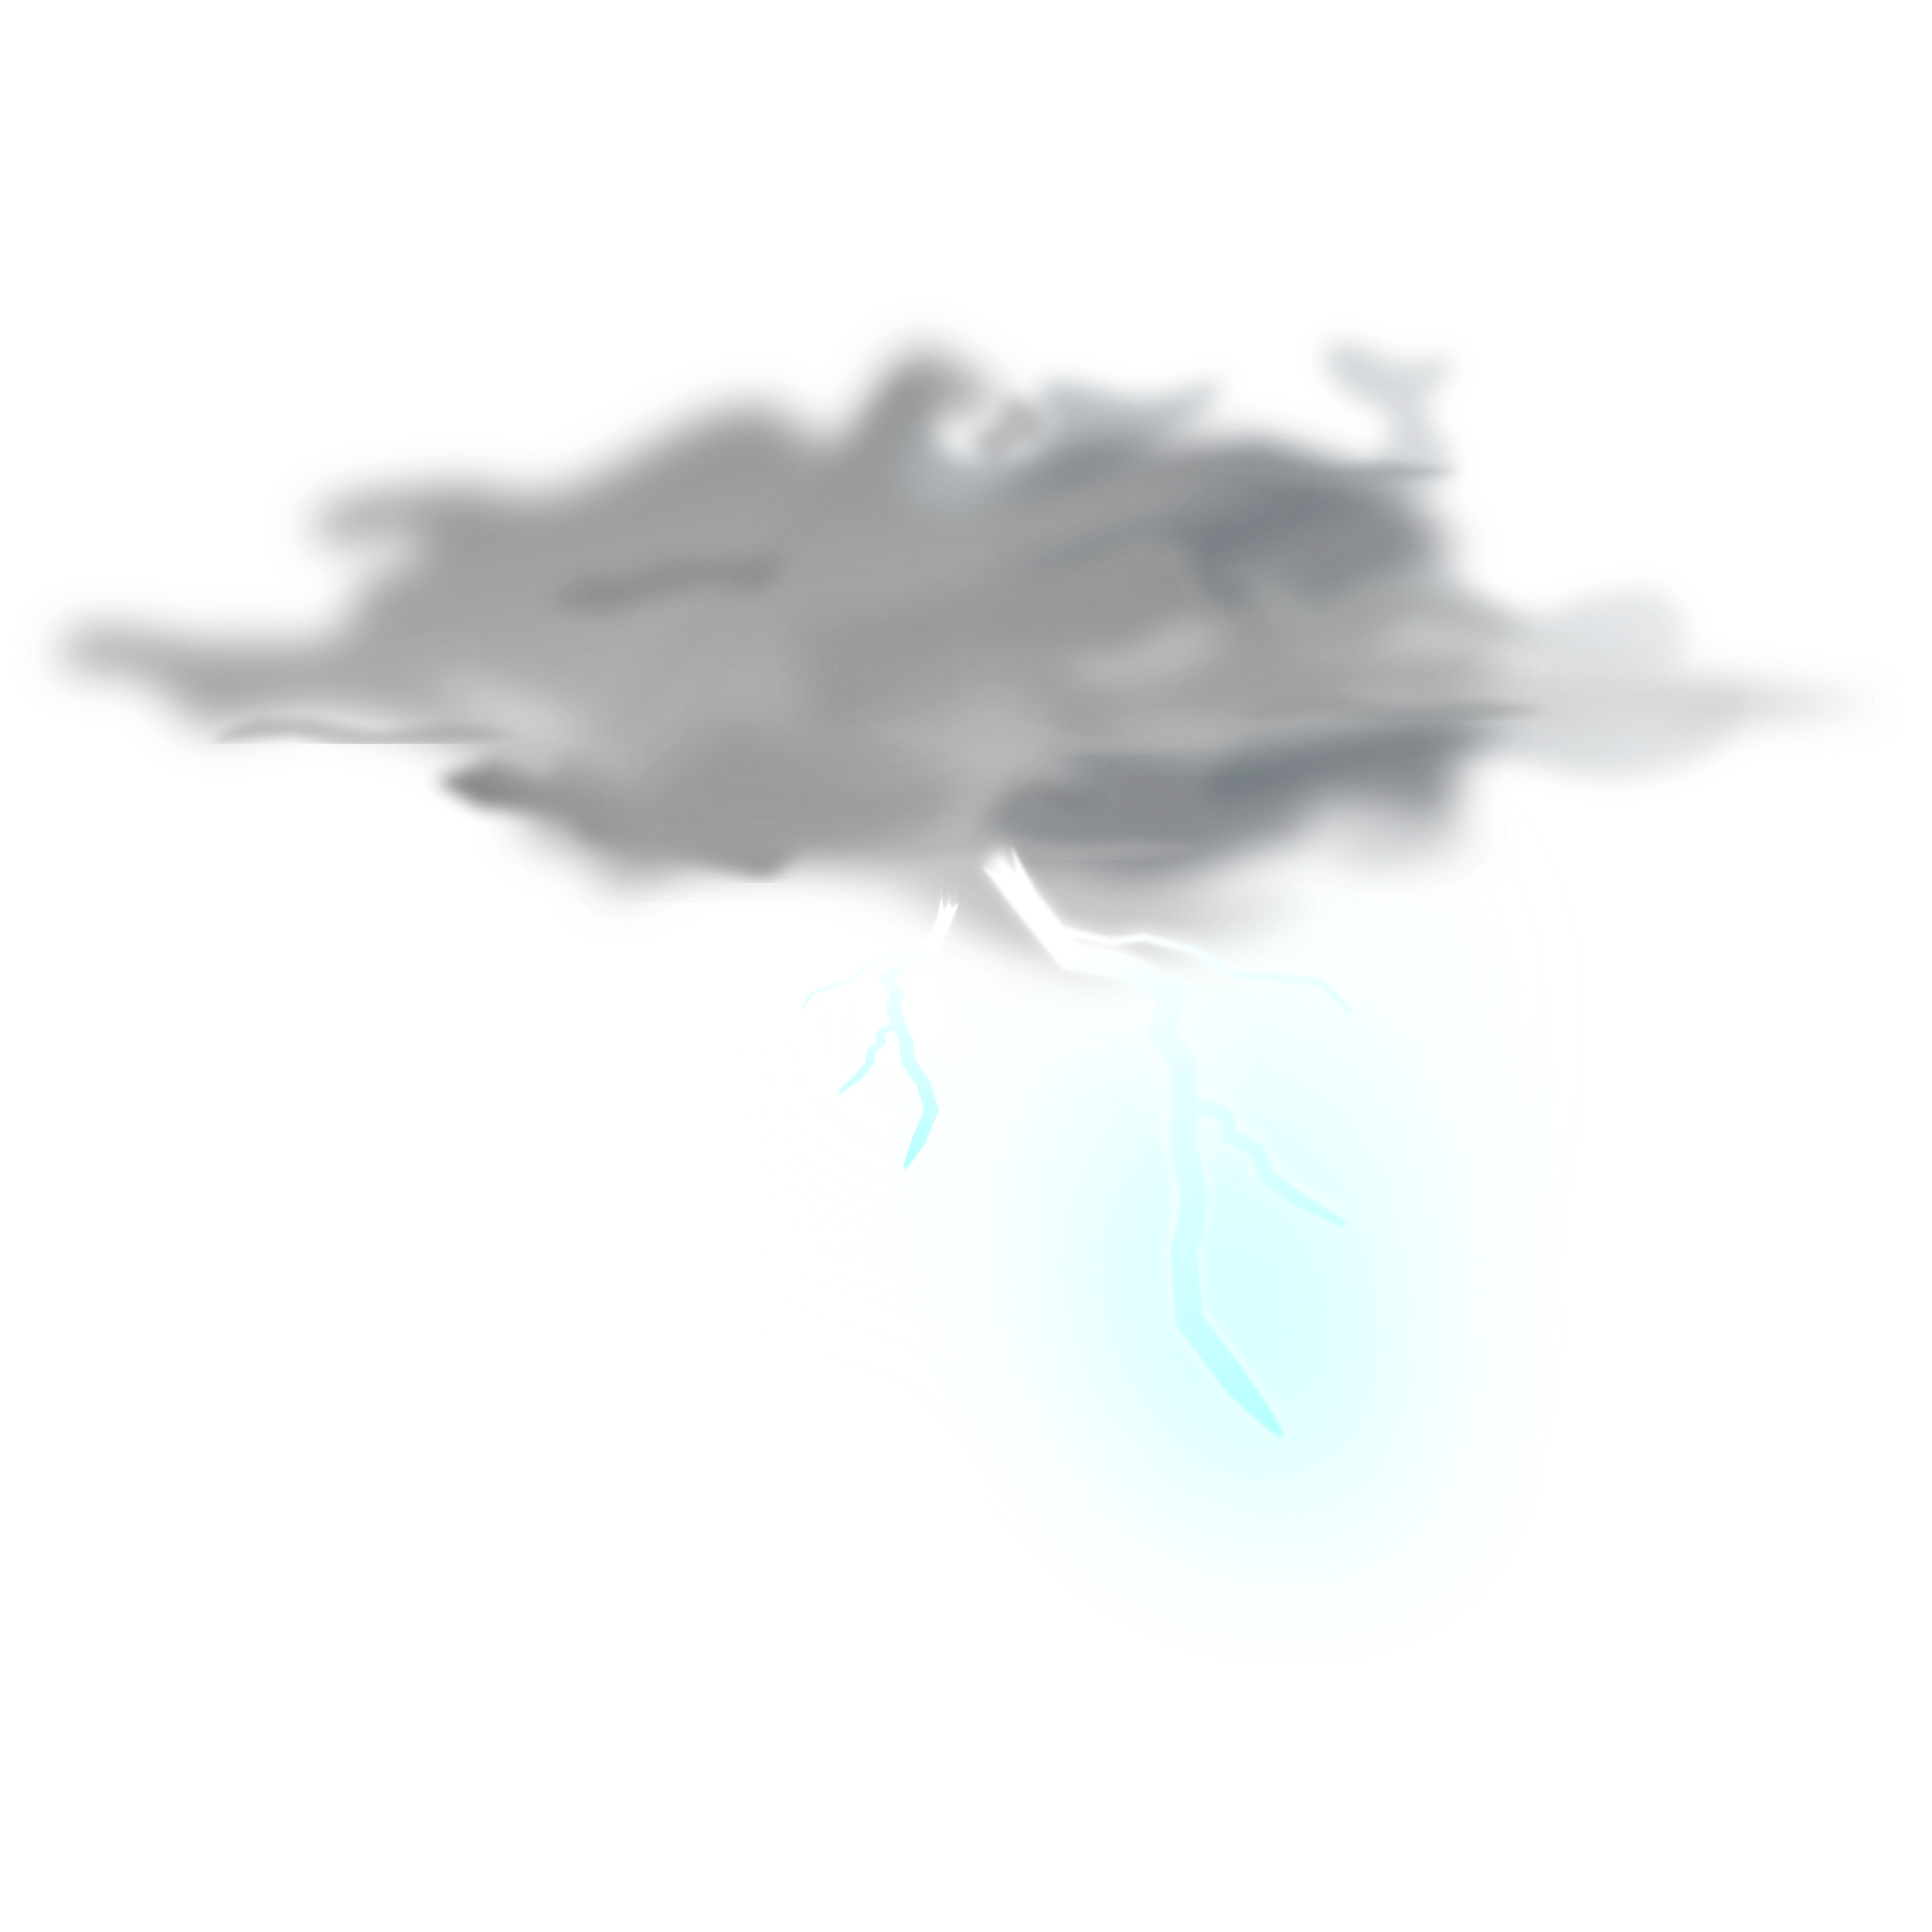 thunderstorm clipart weather tool